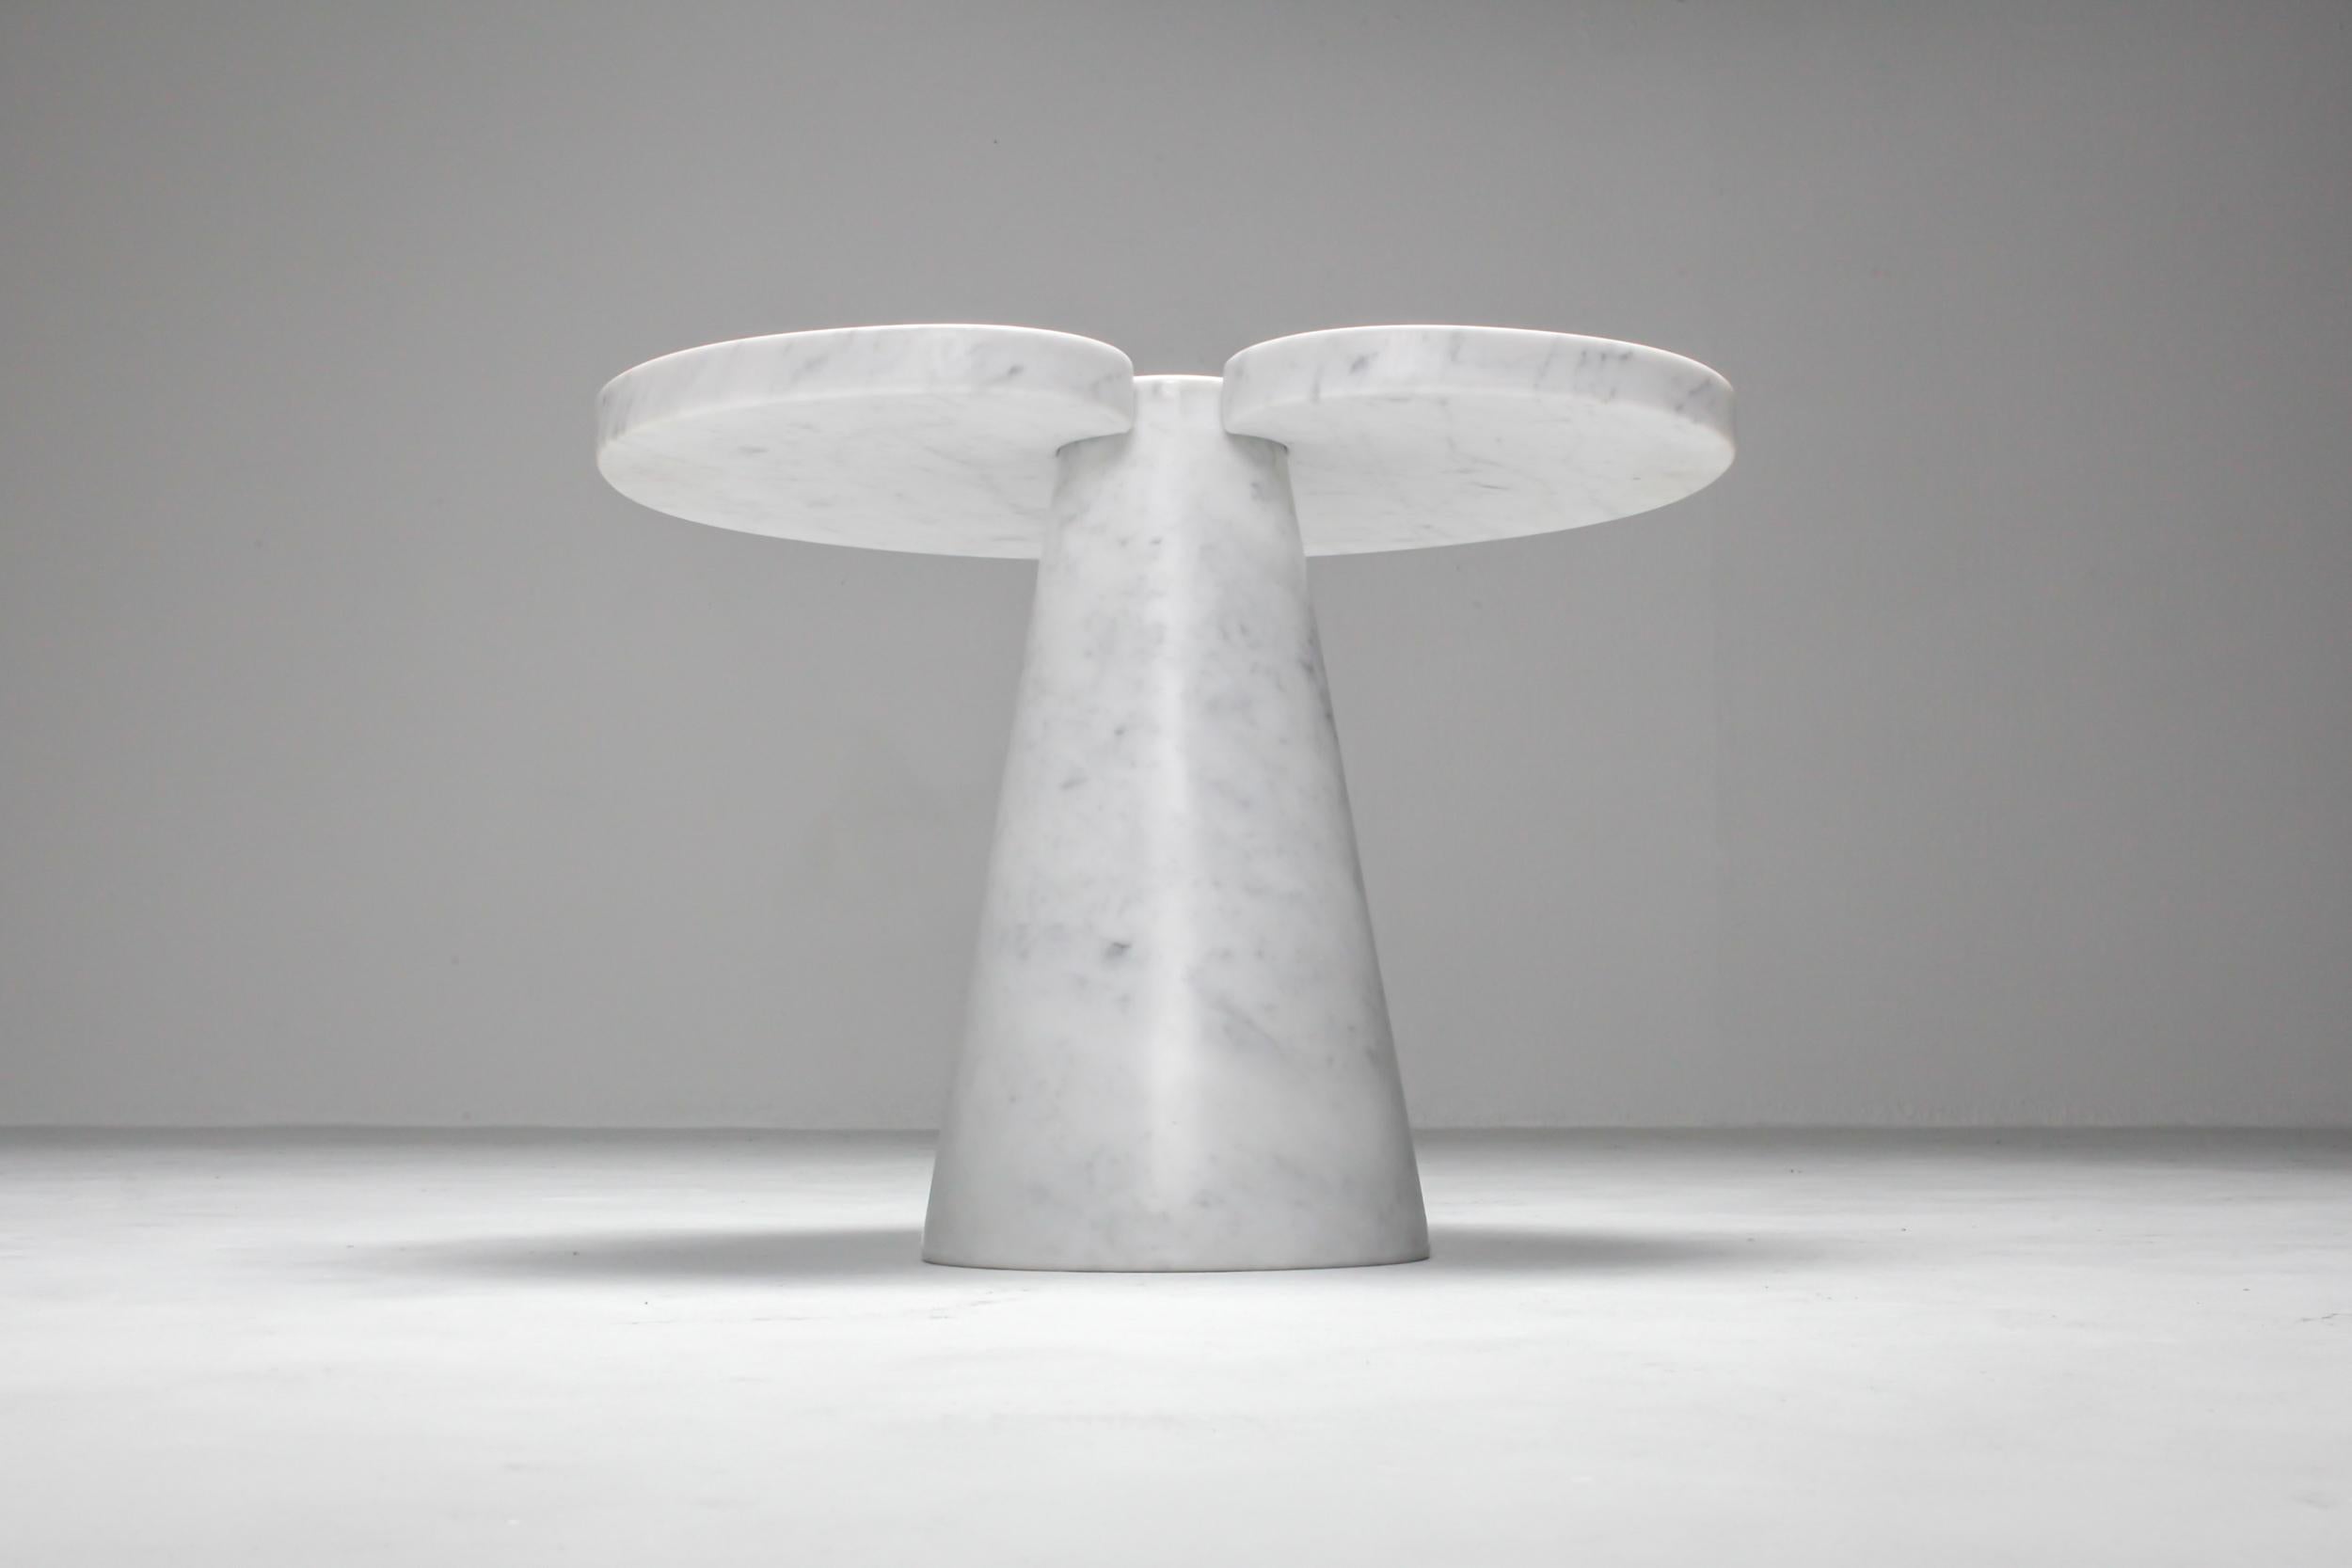 Original Mangiarotti marble side table.

This Eros series coffee table was designed by Angelo Mangiarotti for Skipper in Italy in 1971. It is made of solid white Carrara marble. This elegantly organic table has beautiful subtle veining